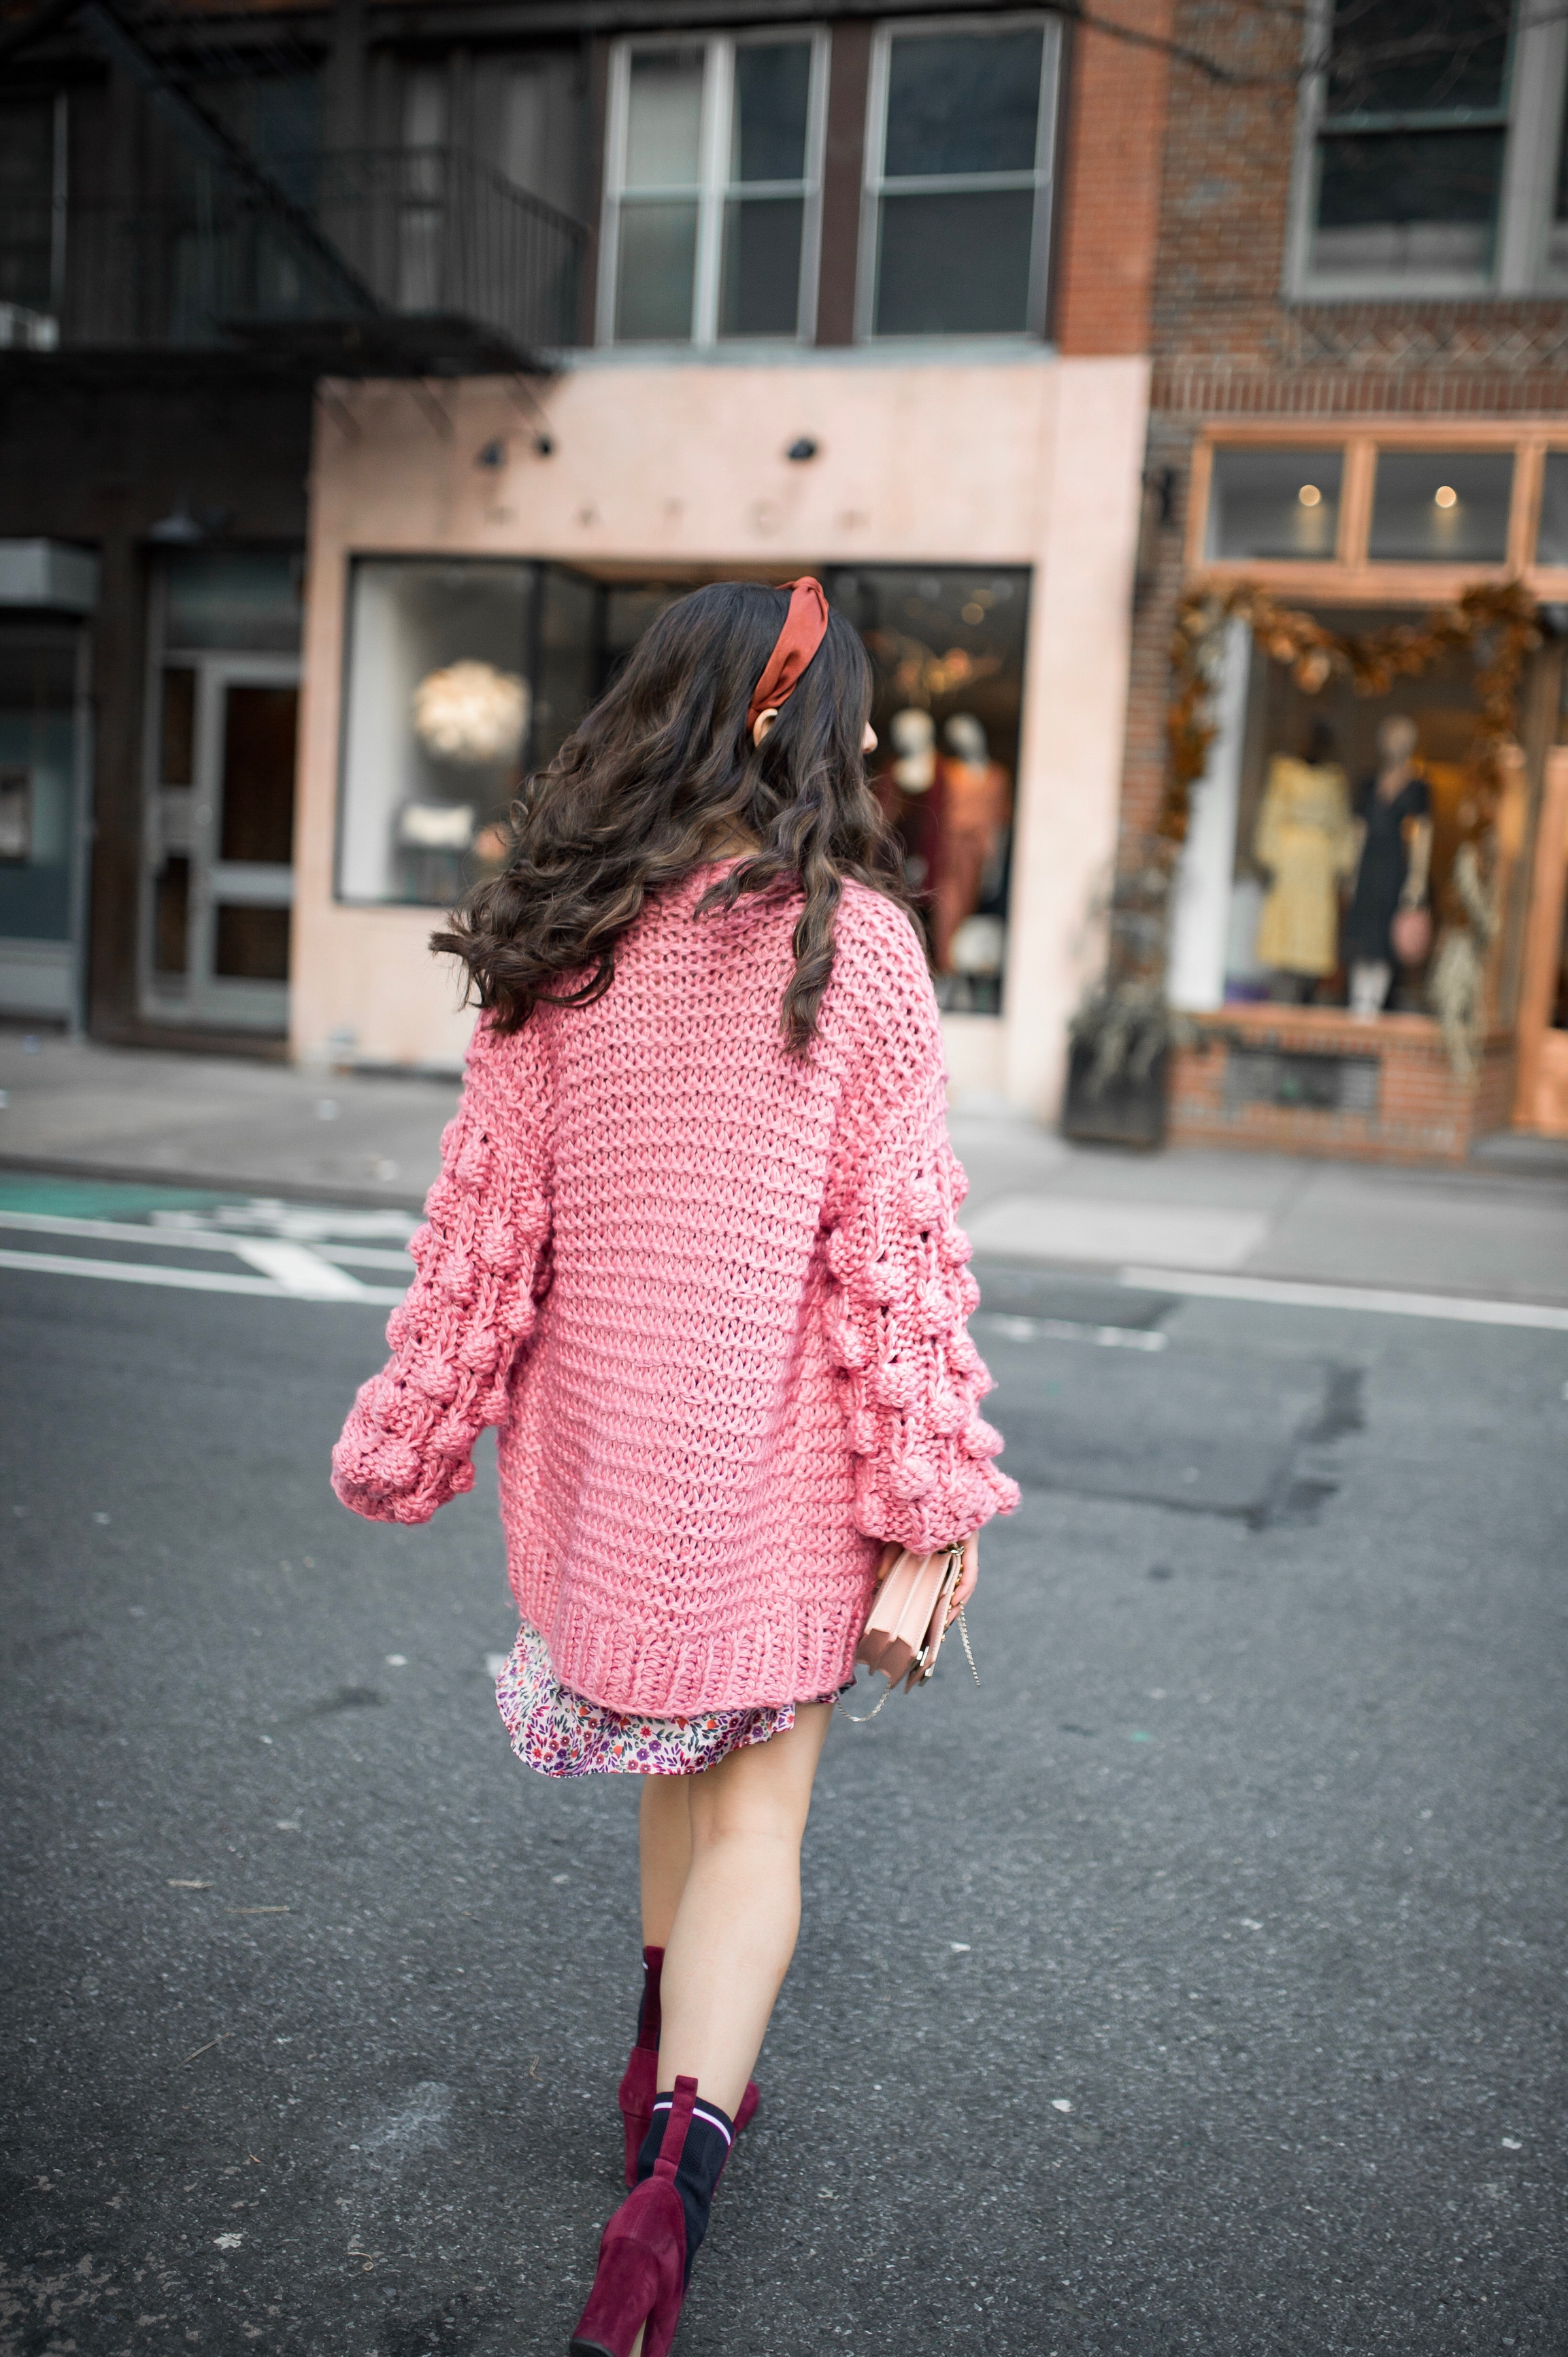 How Being In A Miserable Job Shaped My Entire Career Silk Floral Dress + Pink Pom Pom Sweater Esther Santer Fashion Blog NYC Street Style Blogger Outfit OOTD Trendy  Shopping Mango Sale Winter How To Wear Maroon Velvet Booties Zac Posen Swarovski Bag.jpg